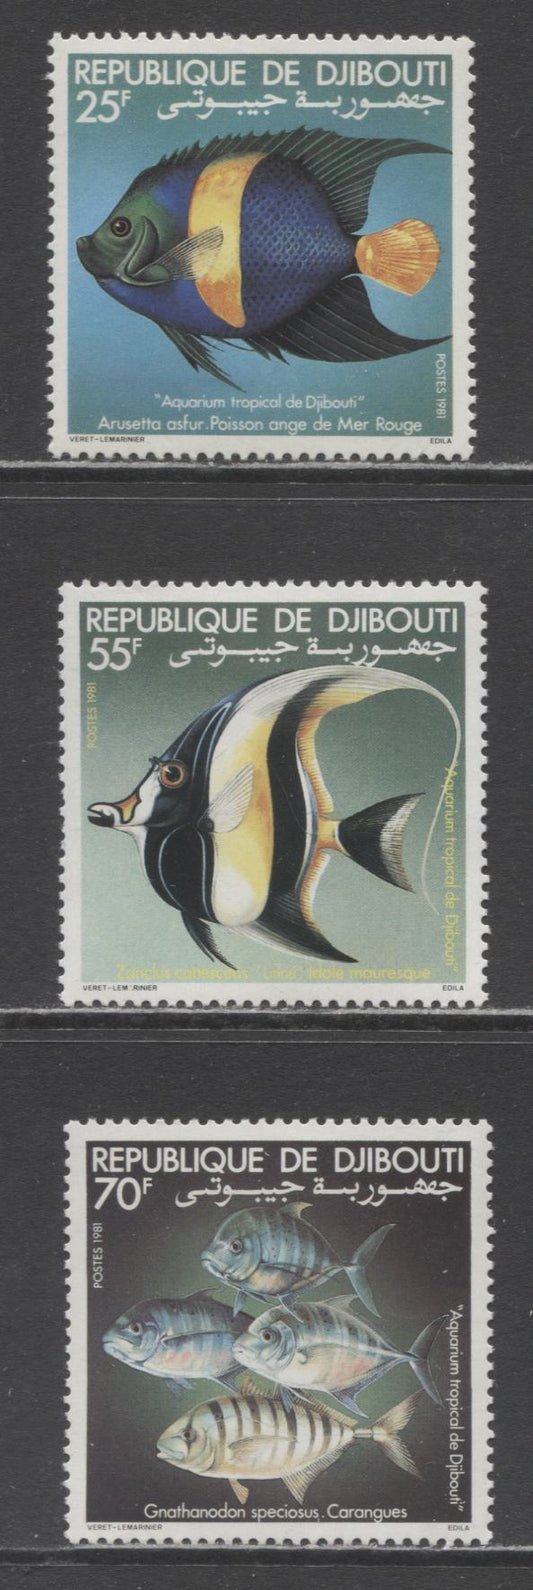 Lot 199 Djbouti SC#521-523 1981 Fish Issue, 3 VFNH Singles, Click on Listing to See ALL Pictures, 2017 Scott Cat. $8.75 USD